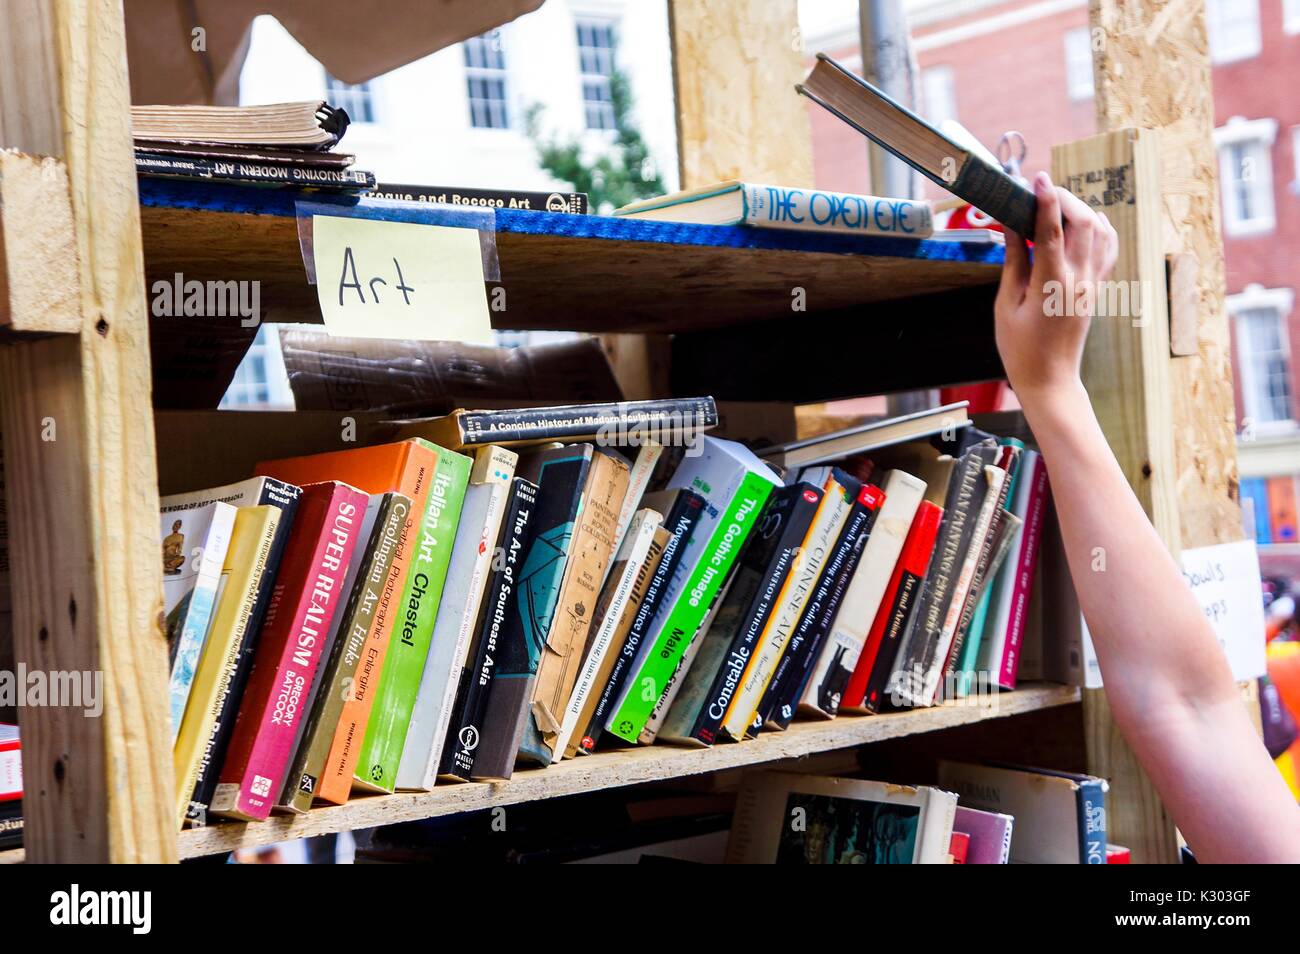 A hand reaches for a book on the top shelf of a cart labeled 'Art, ' with used books for sale during Baltimore Book Festival, Baltimore, Maryland, September, 2013. Stock Photo